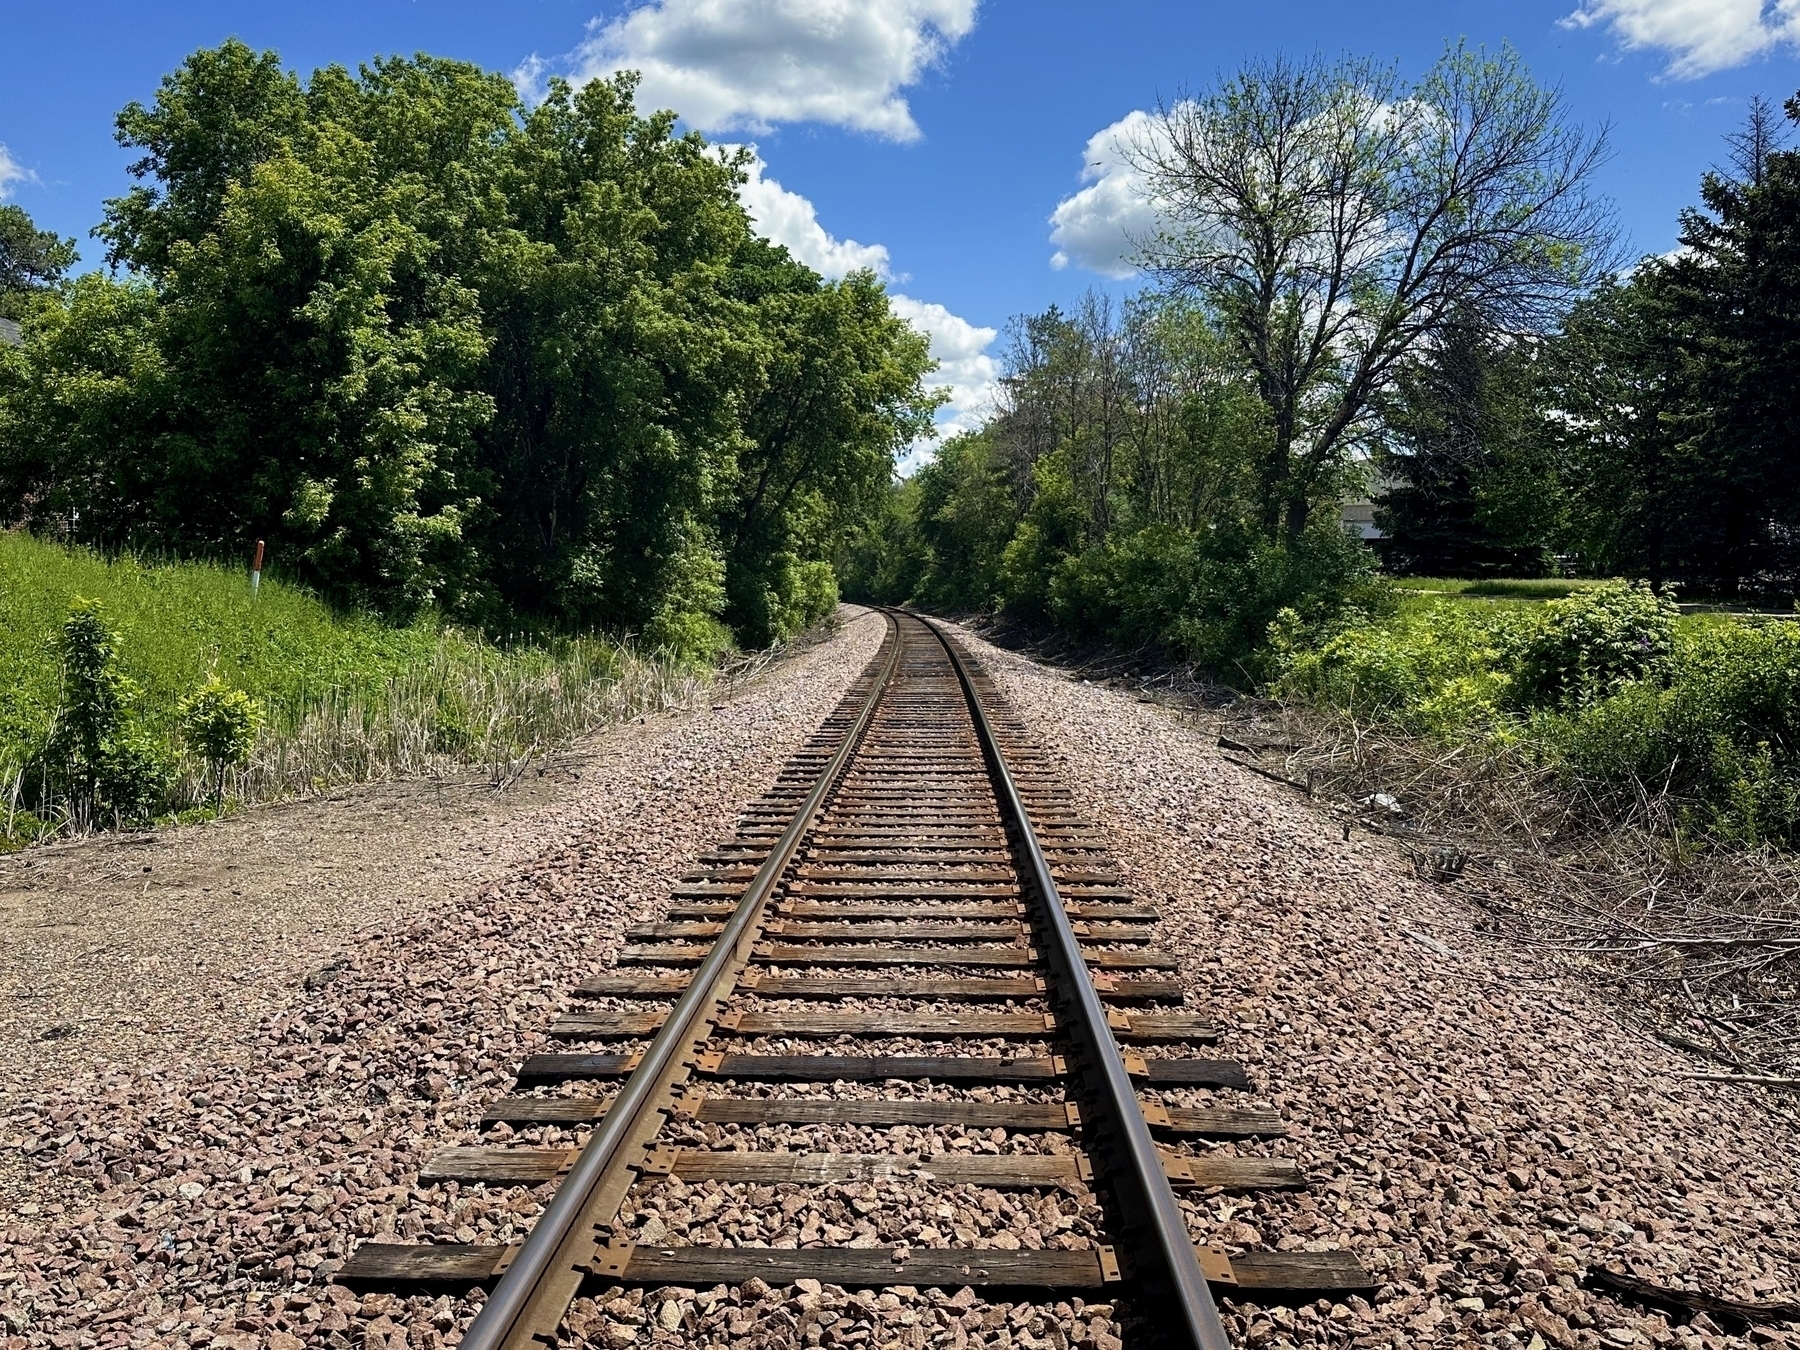 Railroad tracks stretch into the distance surrounded by trees and greenery beneath a blue sky with scattered clouds.